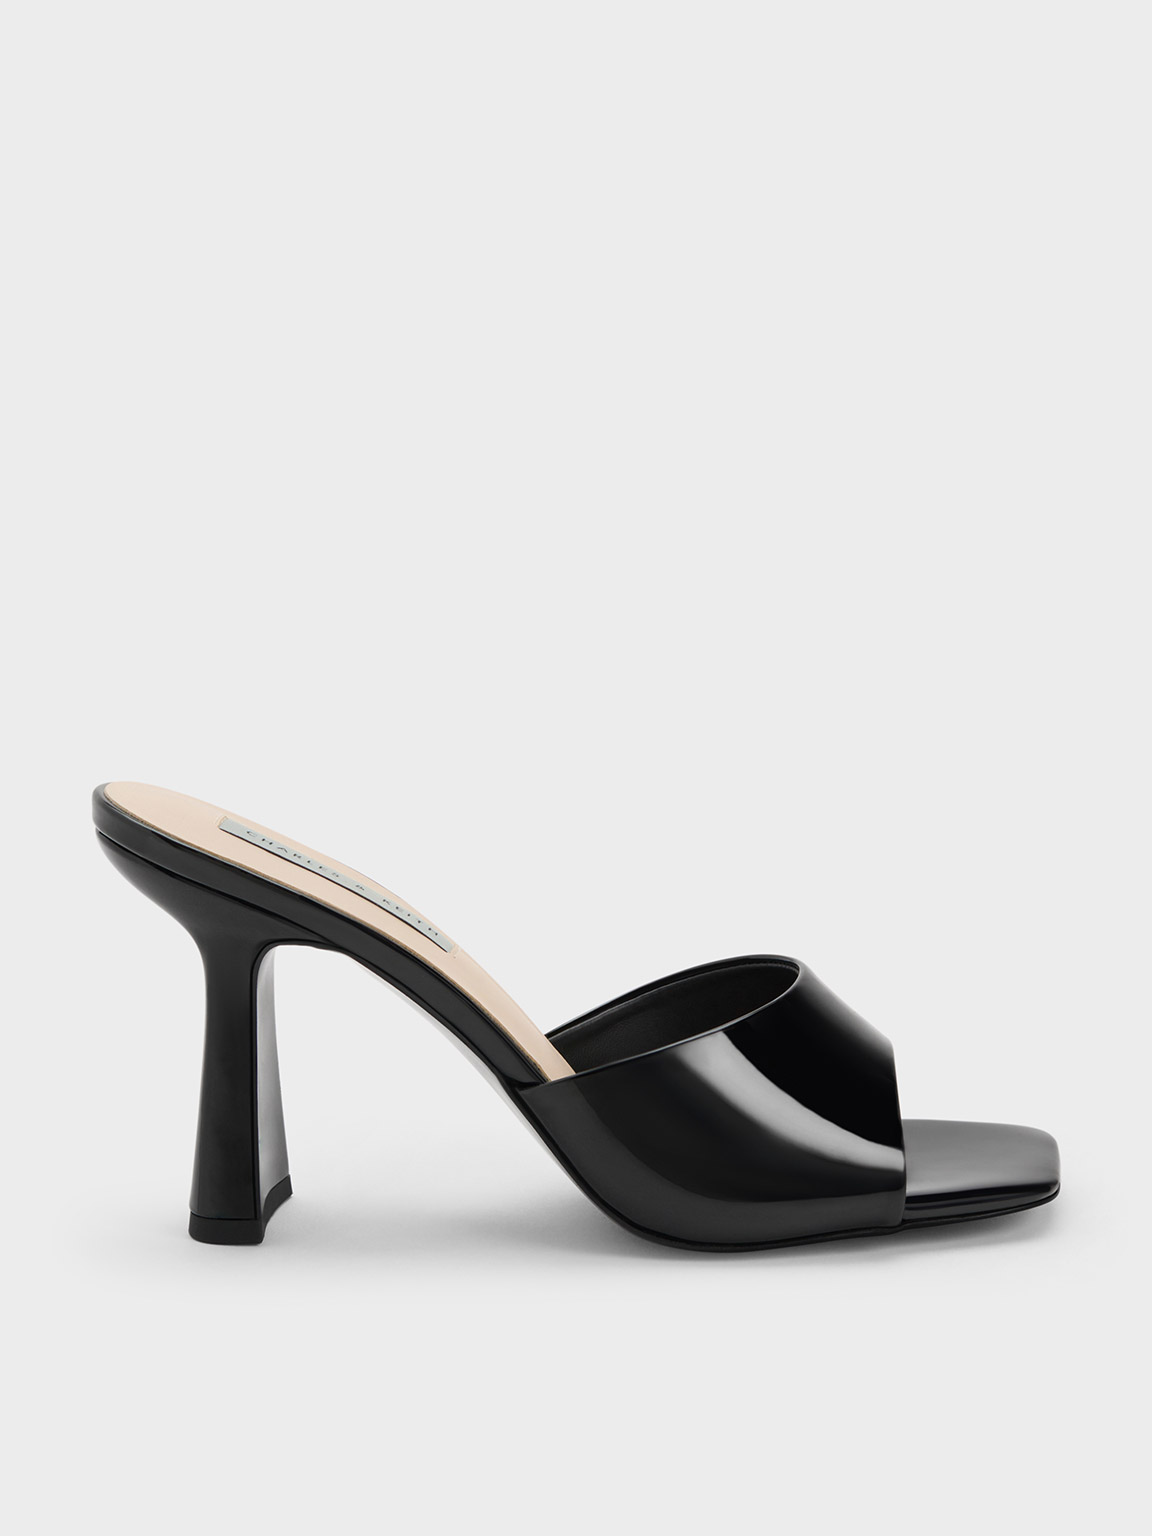 Black Patent Patent Square Toe Heeled Mules | CHARLES & KEITH